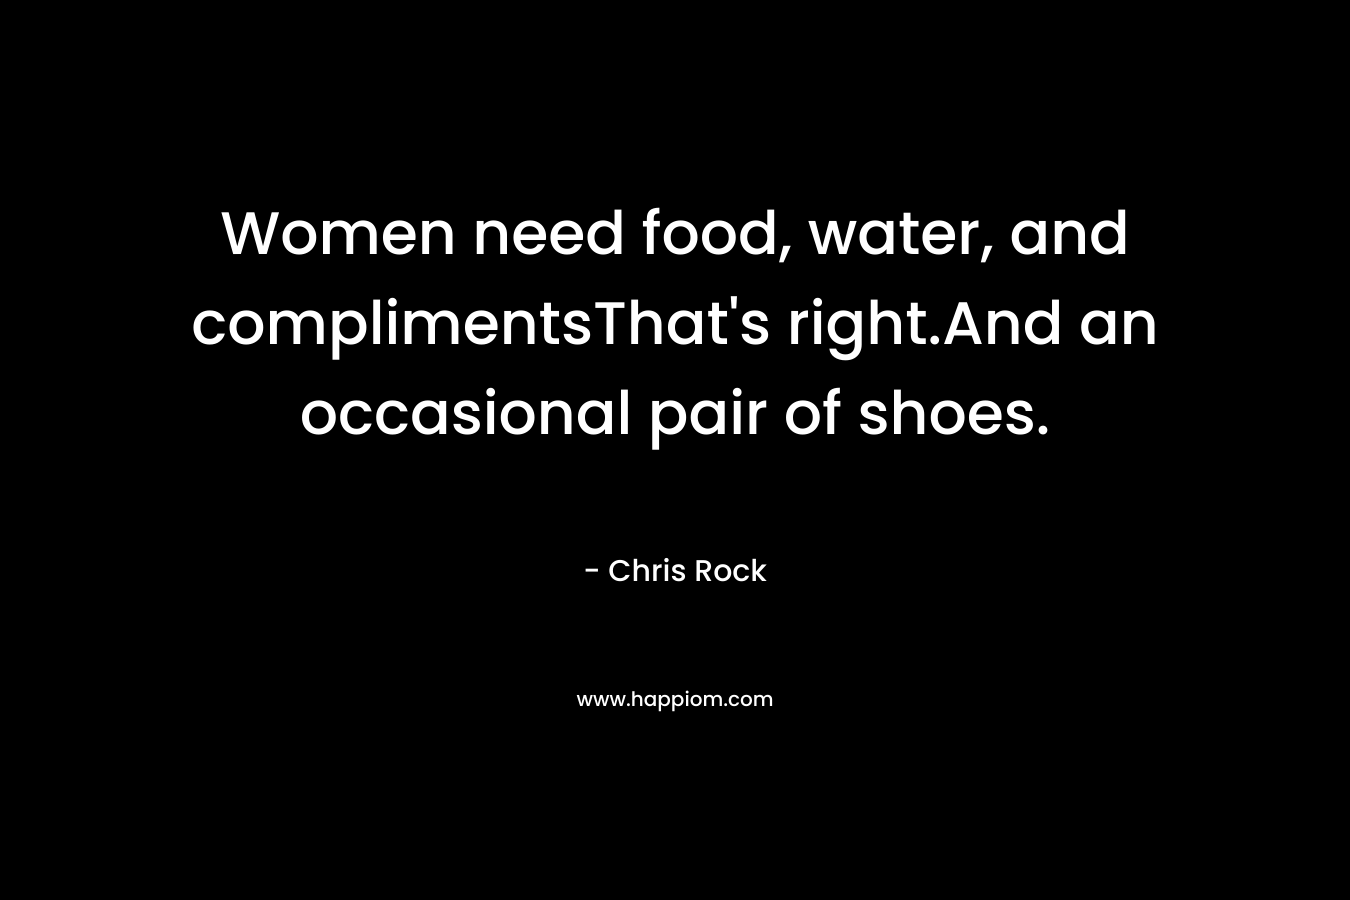 Women need food, water, and complimentsThat's right.And an occasional pair of shoes.